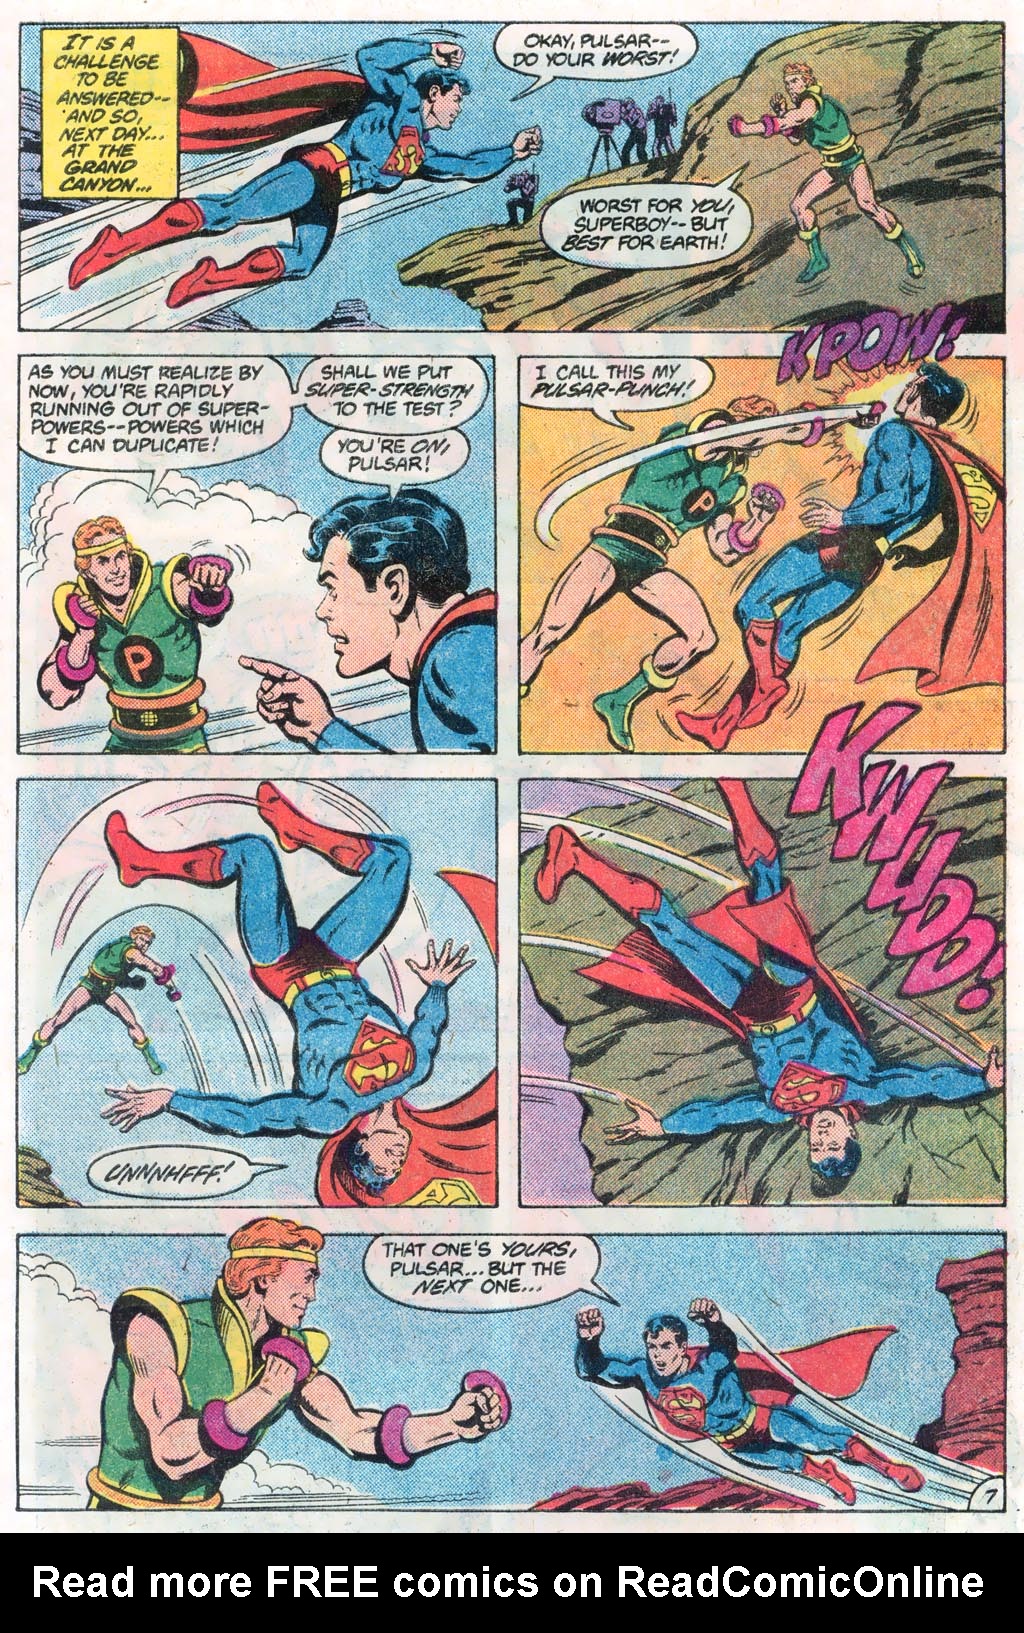 The New Adventures of Superboy 31 Page 10